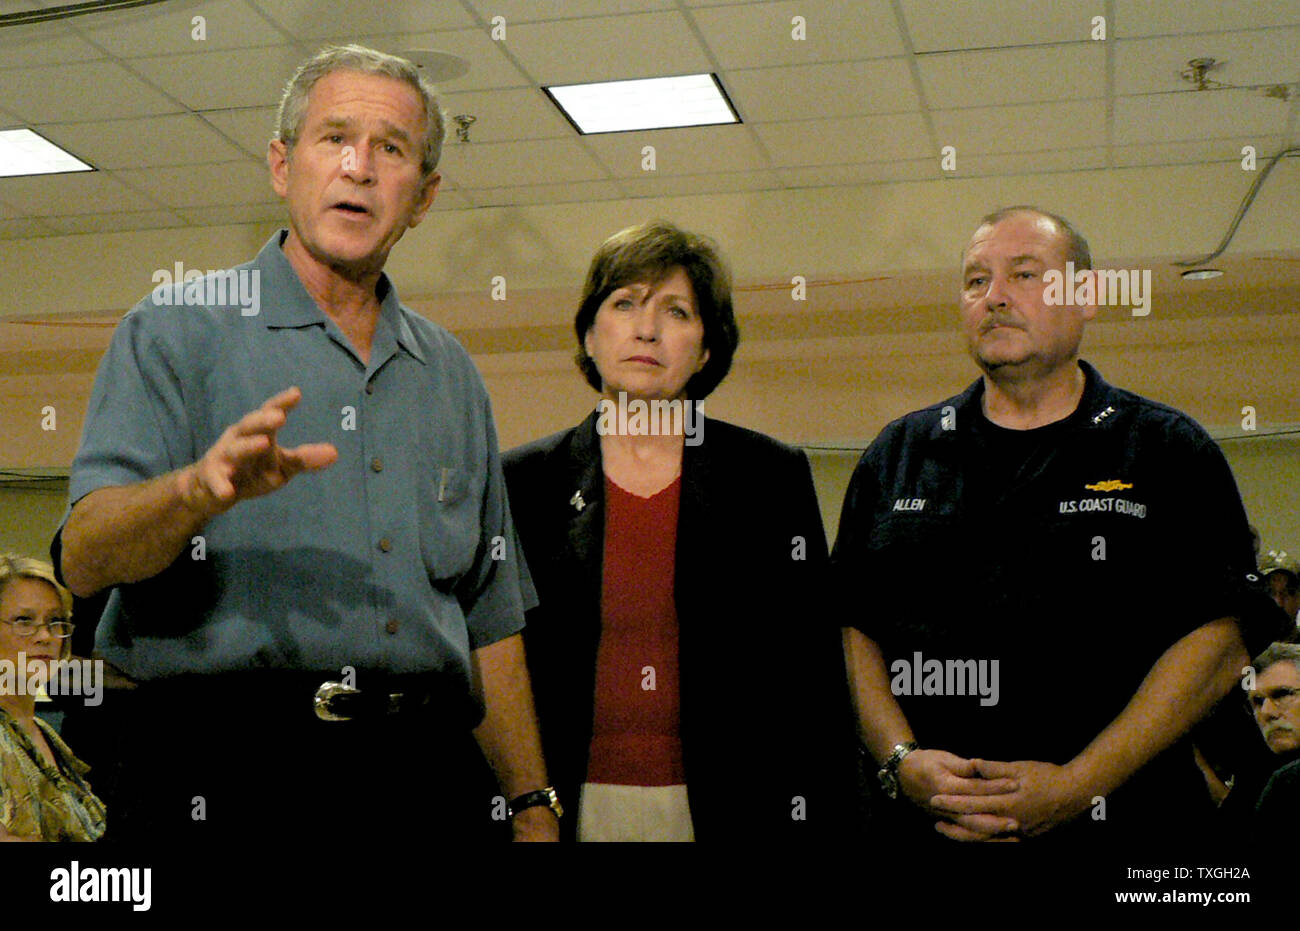 President George Bush speaks in front of Louisiam Gov Kathleen Blanco and FEMA's Thad Allen while visiting the FEMA offices in Baton Rouge, LA, on September 25, 2005. Bush visited the FEMA field office the day after Hurricane Rita made landfall.  (UPI Photo/James Terry III) Stock Photo